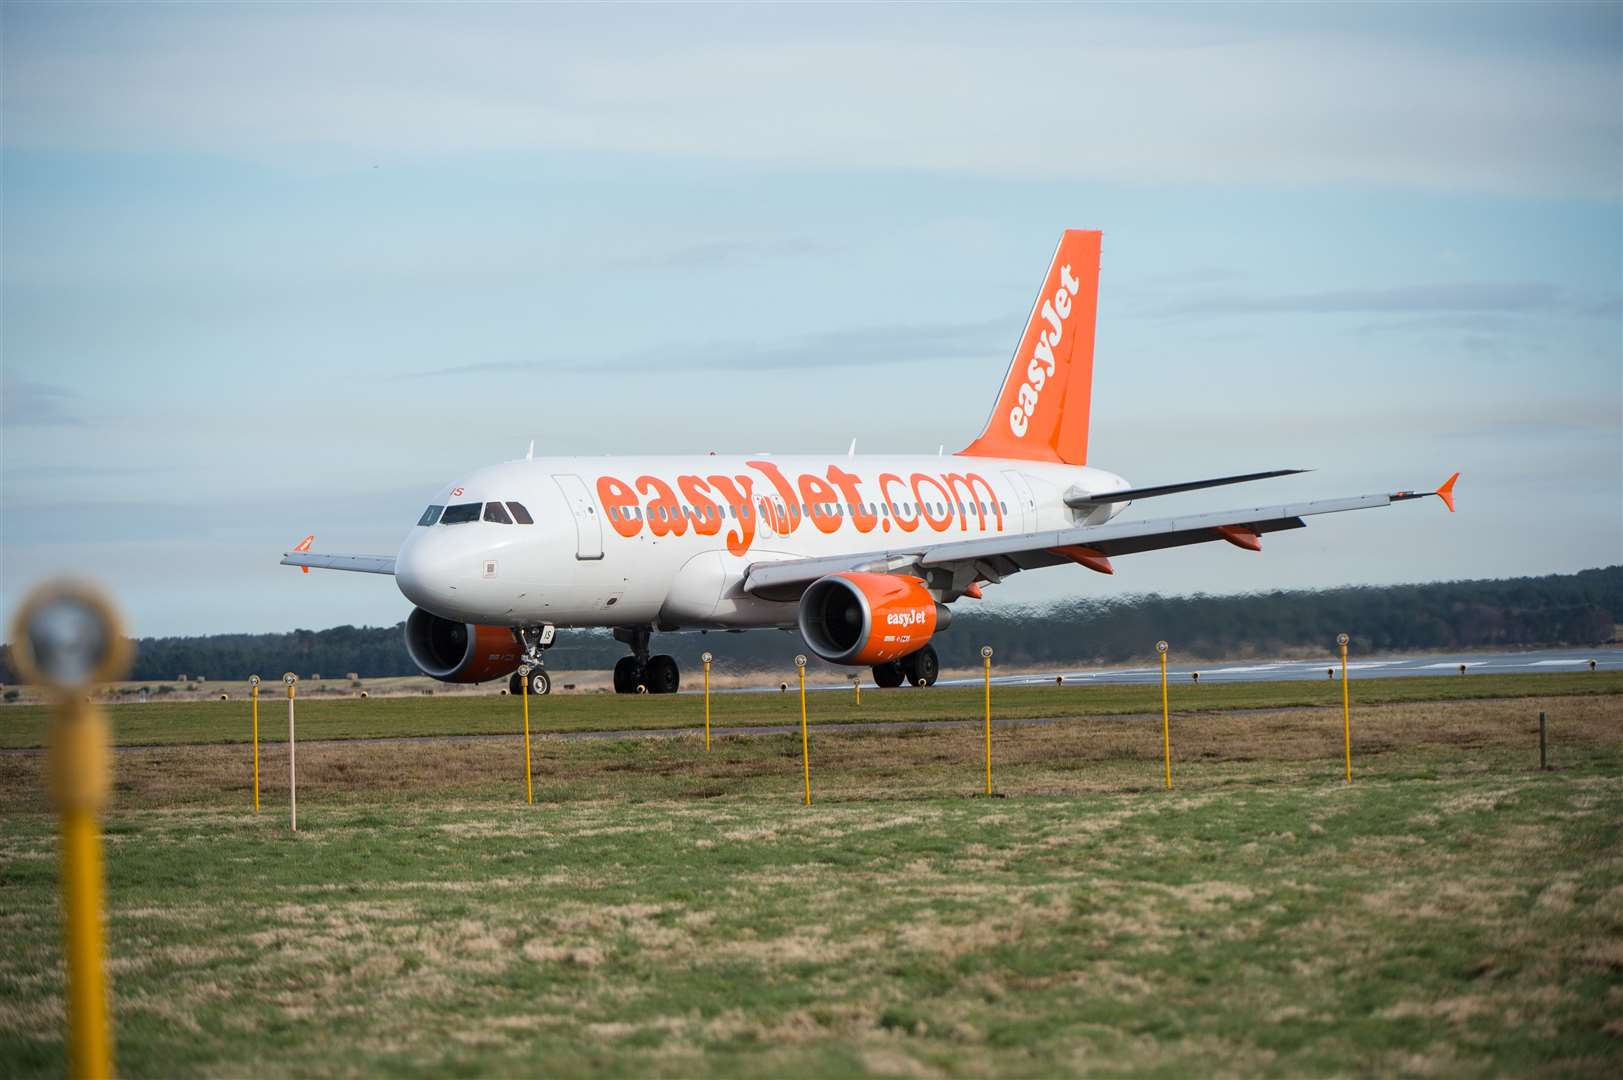 Together with other airlines, easyJet has axed several flights across its UK services in the last few months as air travel re-opened. Picture: Callum Mackay.